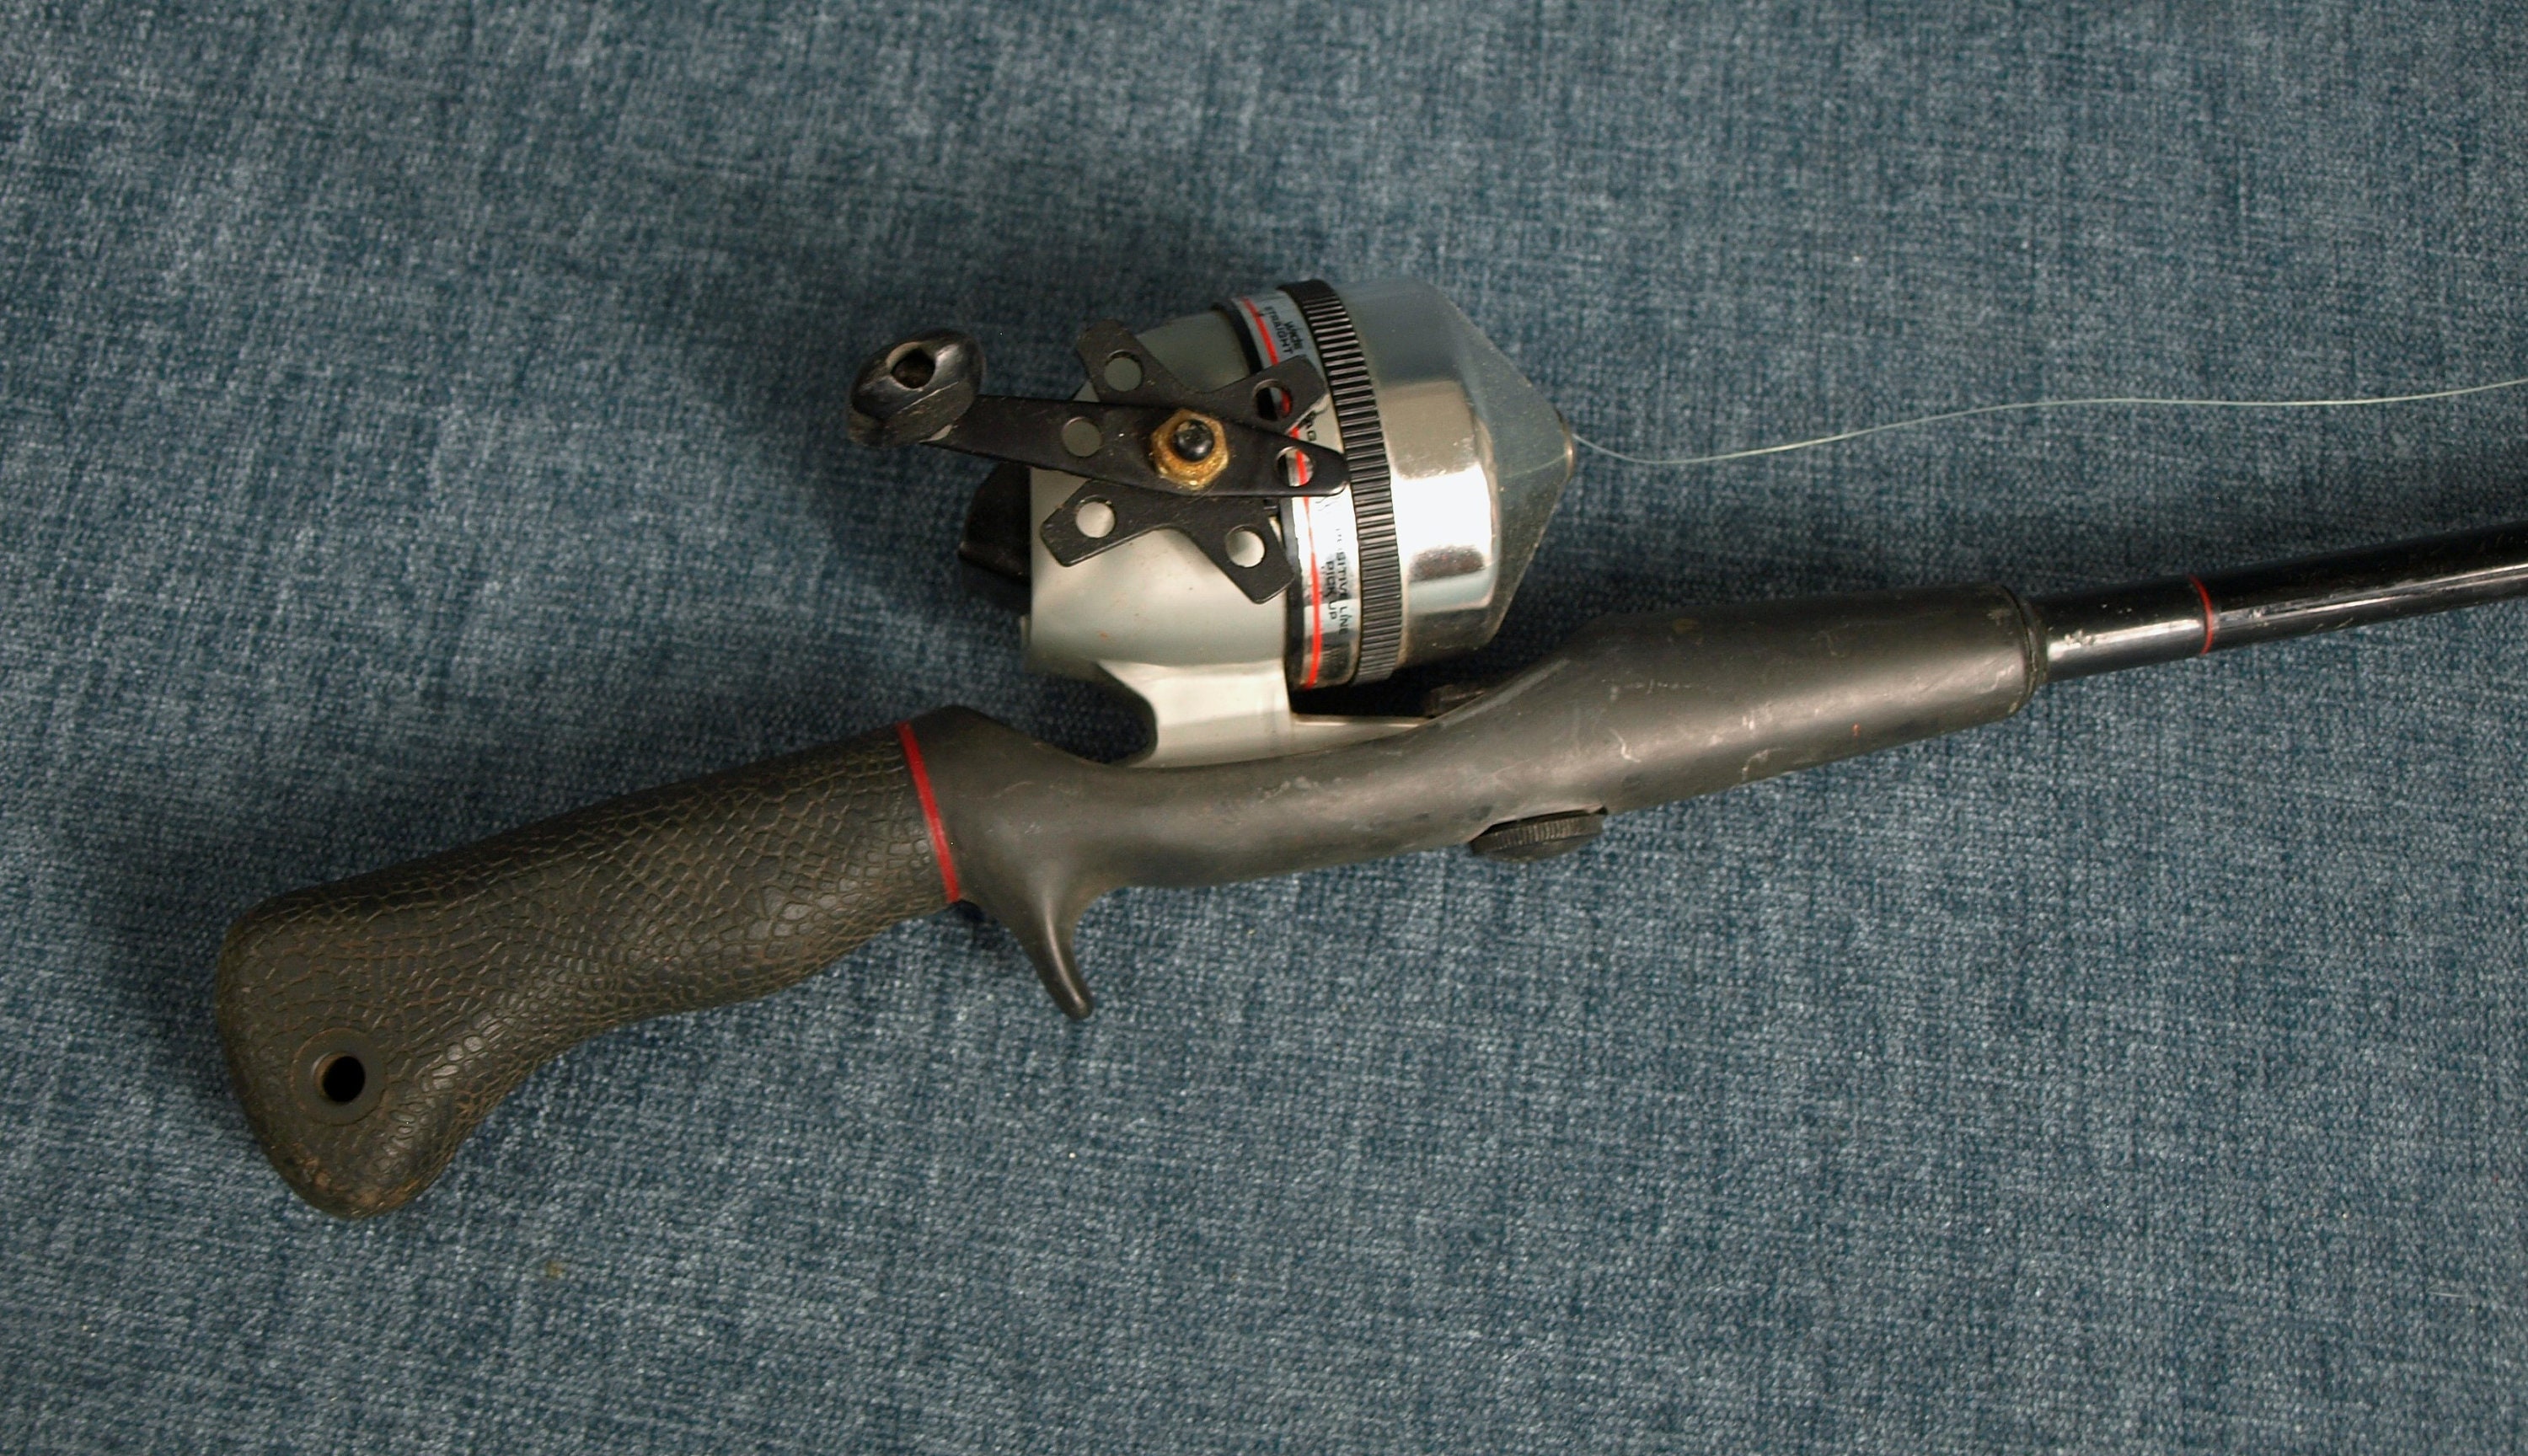 Reserved Vintage Shiman AC-1552 Pistol Grip Fishing Rod 5'6 Line Wt. 6-12  Lb Lure Wt 1/8-3/4 Oz With Zebco 10/20 USA Spin Cast Reel -  Hong Kong